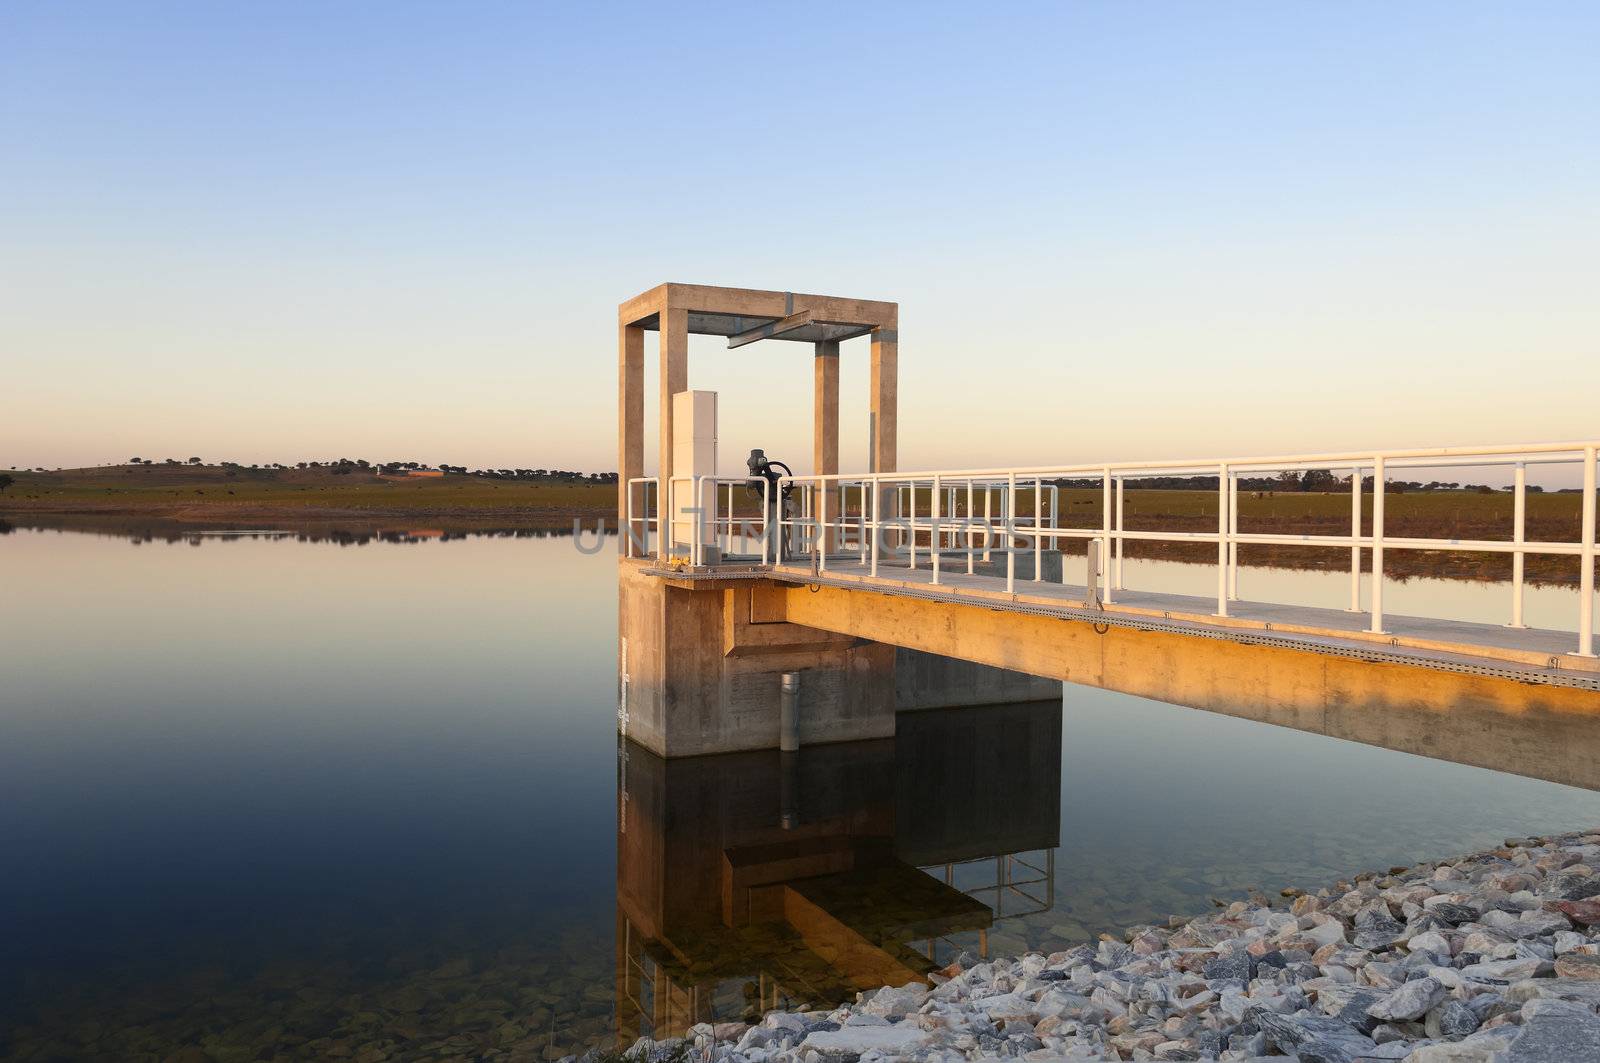 Outlet tower in a small irrigation dam, part of the Alqueva Irrigation Plan, Alentejo, Portugal